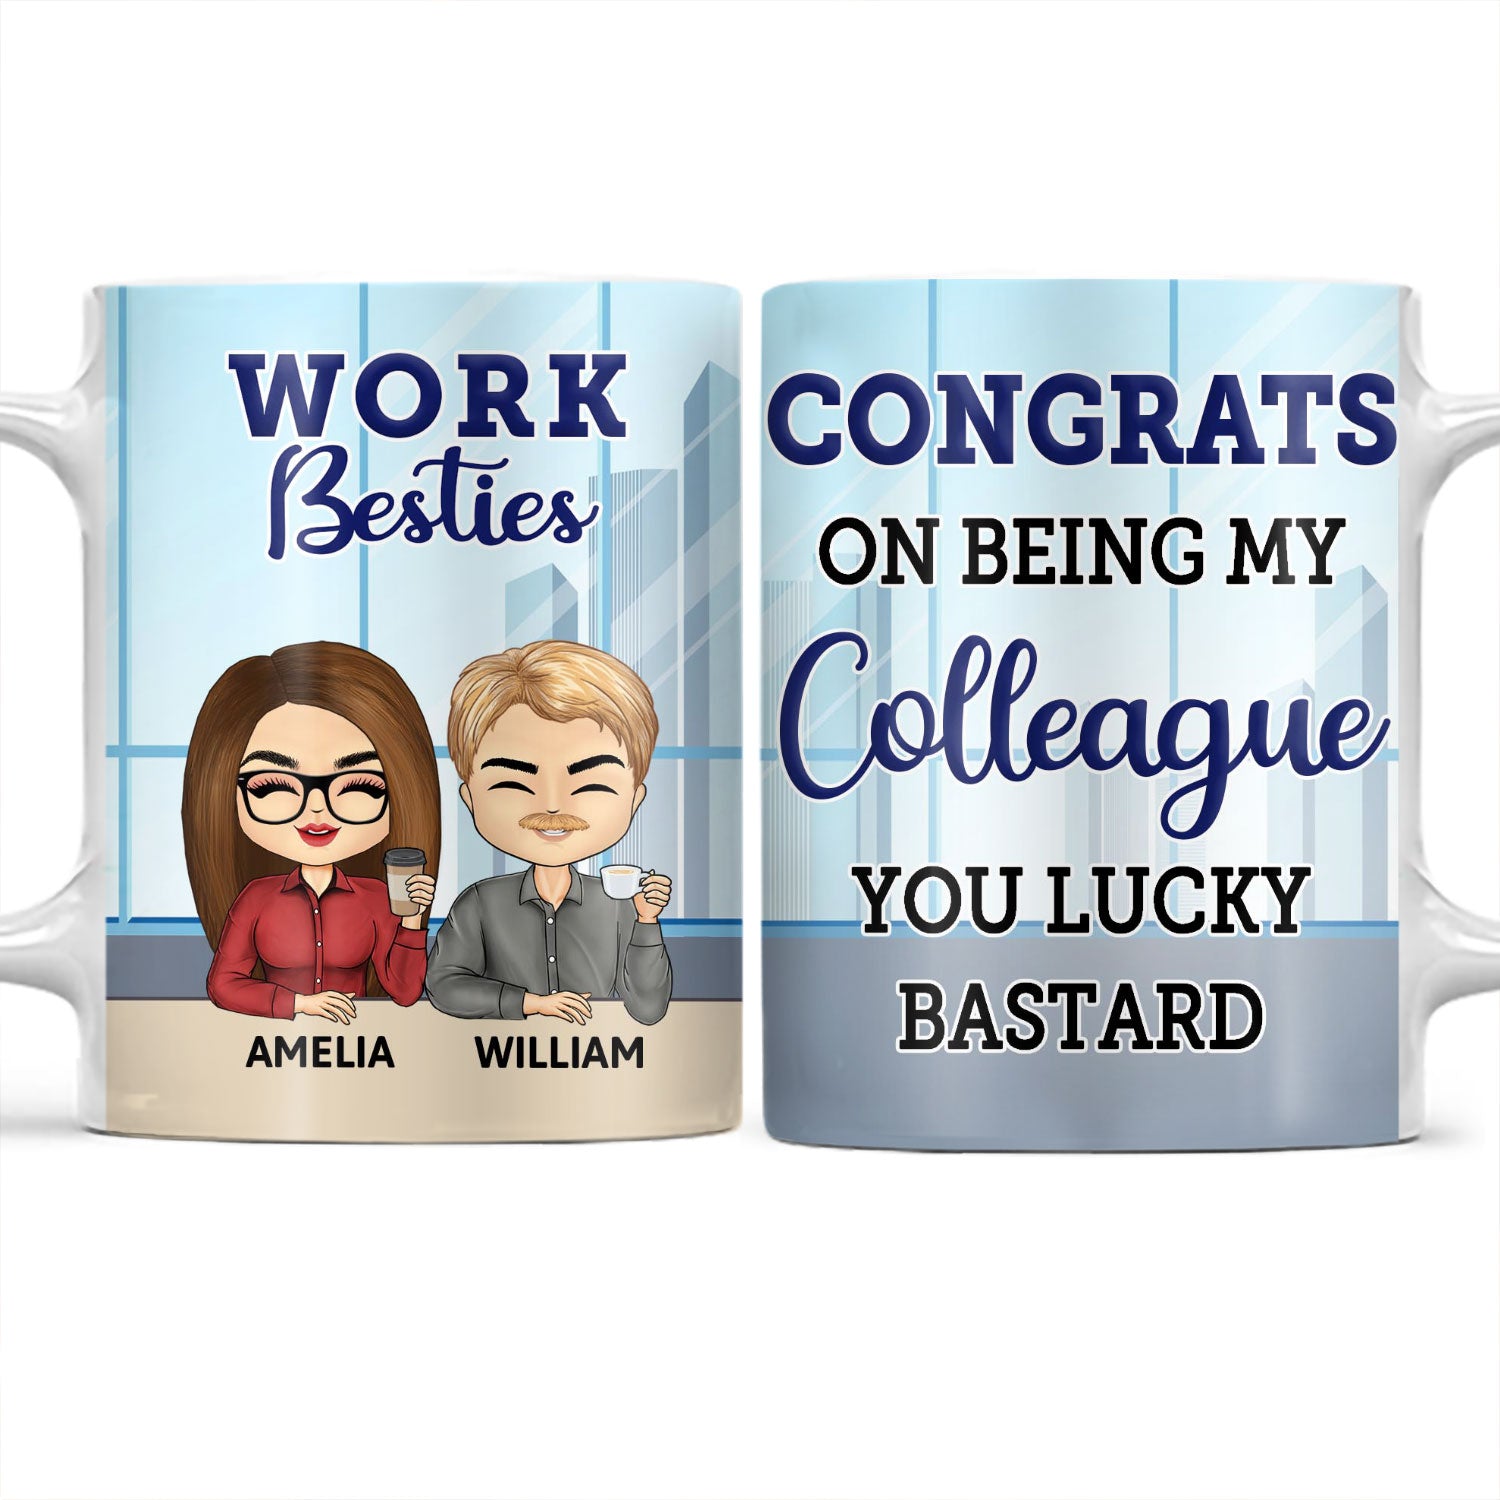 Congrats On Being My Colleague - Funny, Anniversary, Birthday Gifts For Colleagues, Coworker, Besties - Personalized Custom White Edge-to-Edge Mug